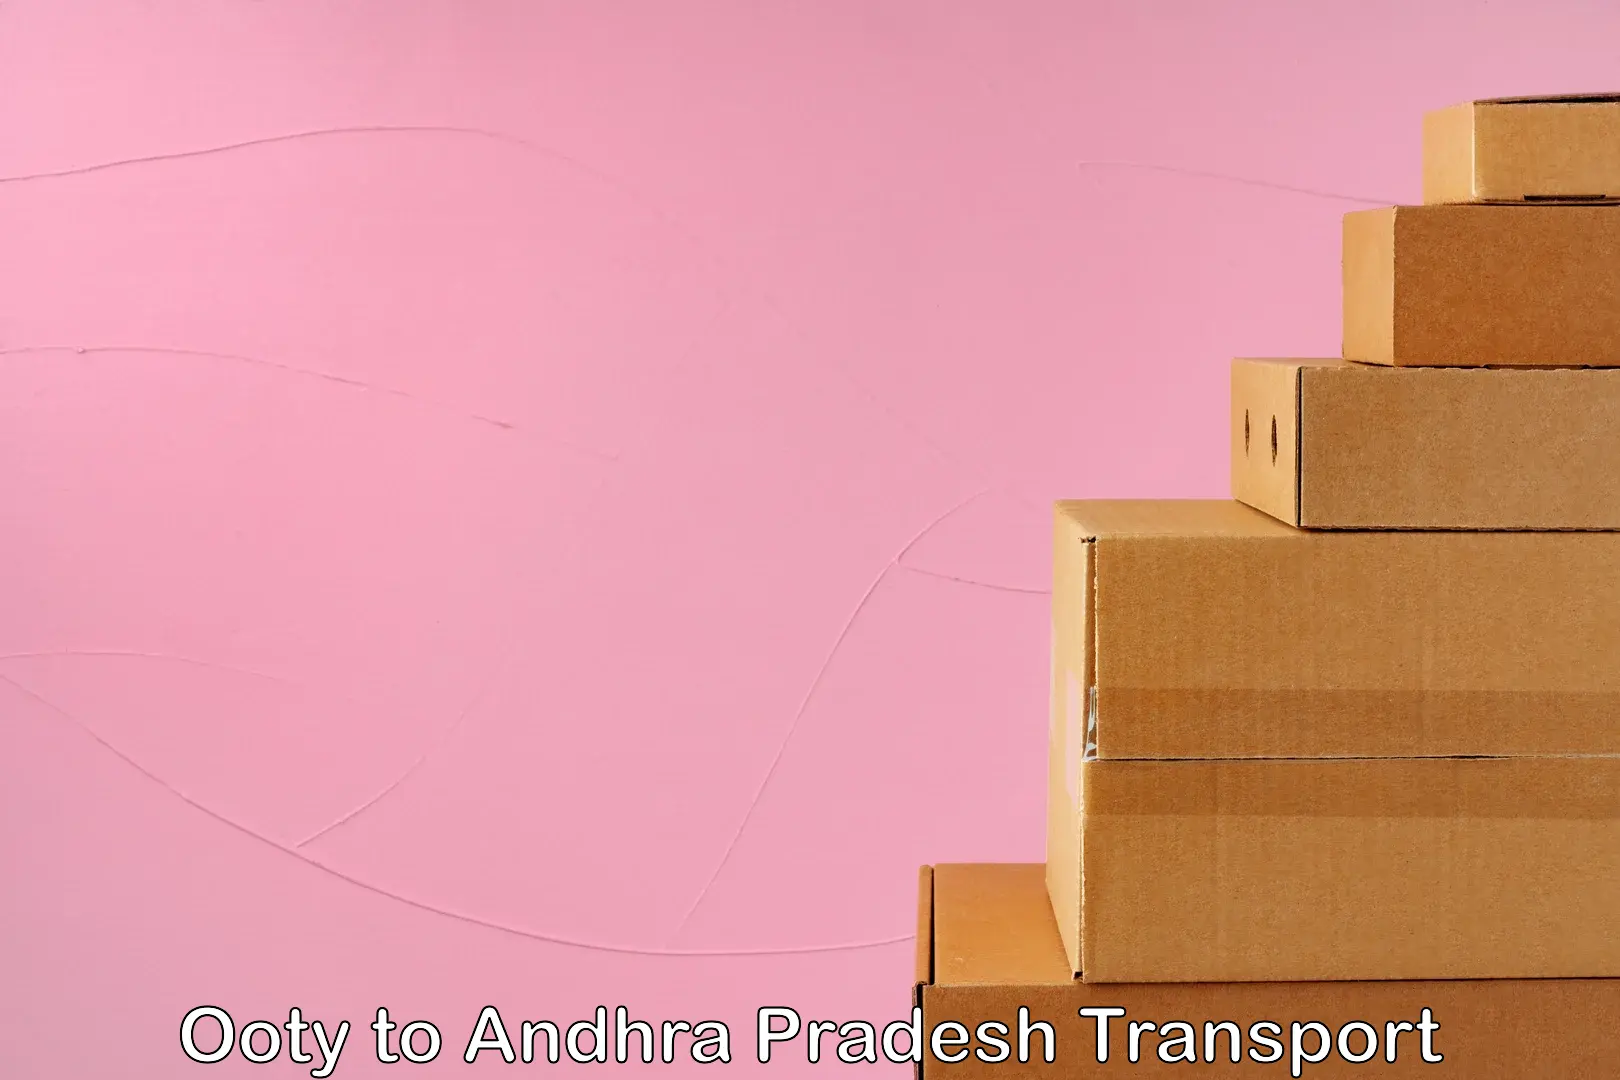 Goods delivery service Ooty to Bobbili